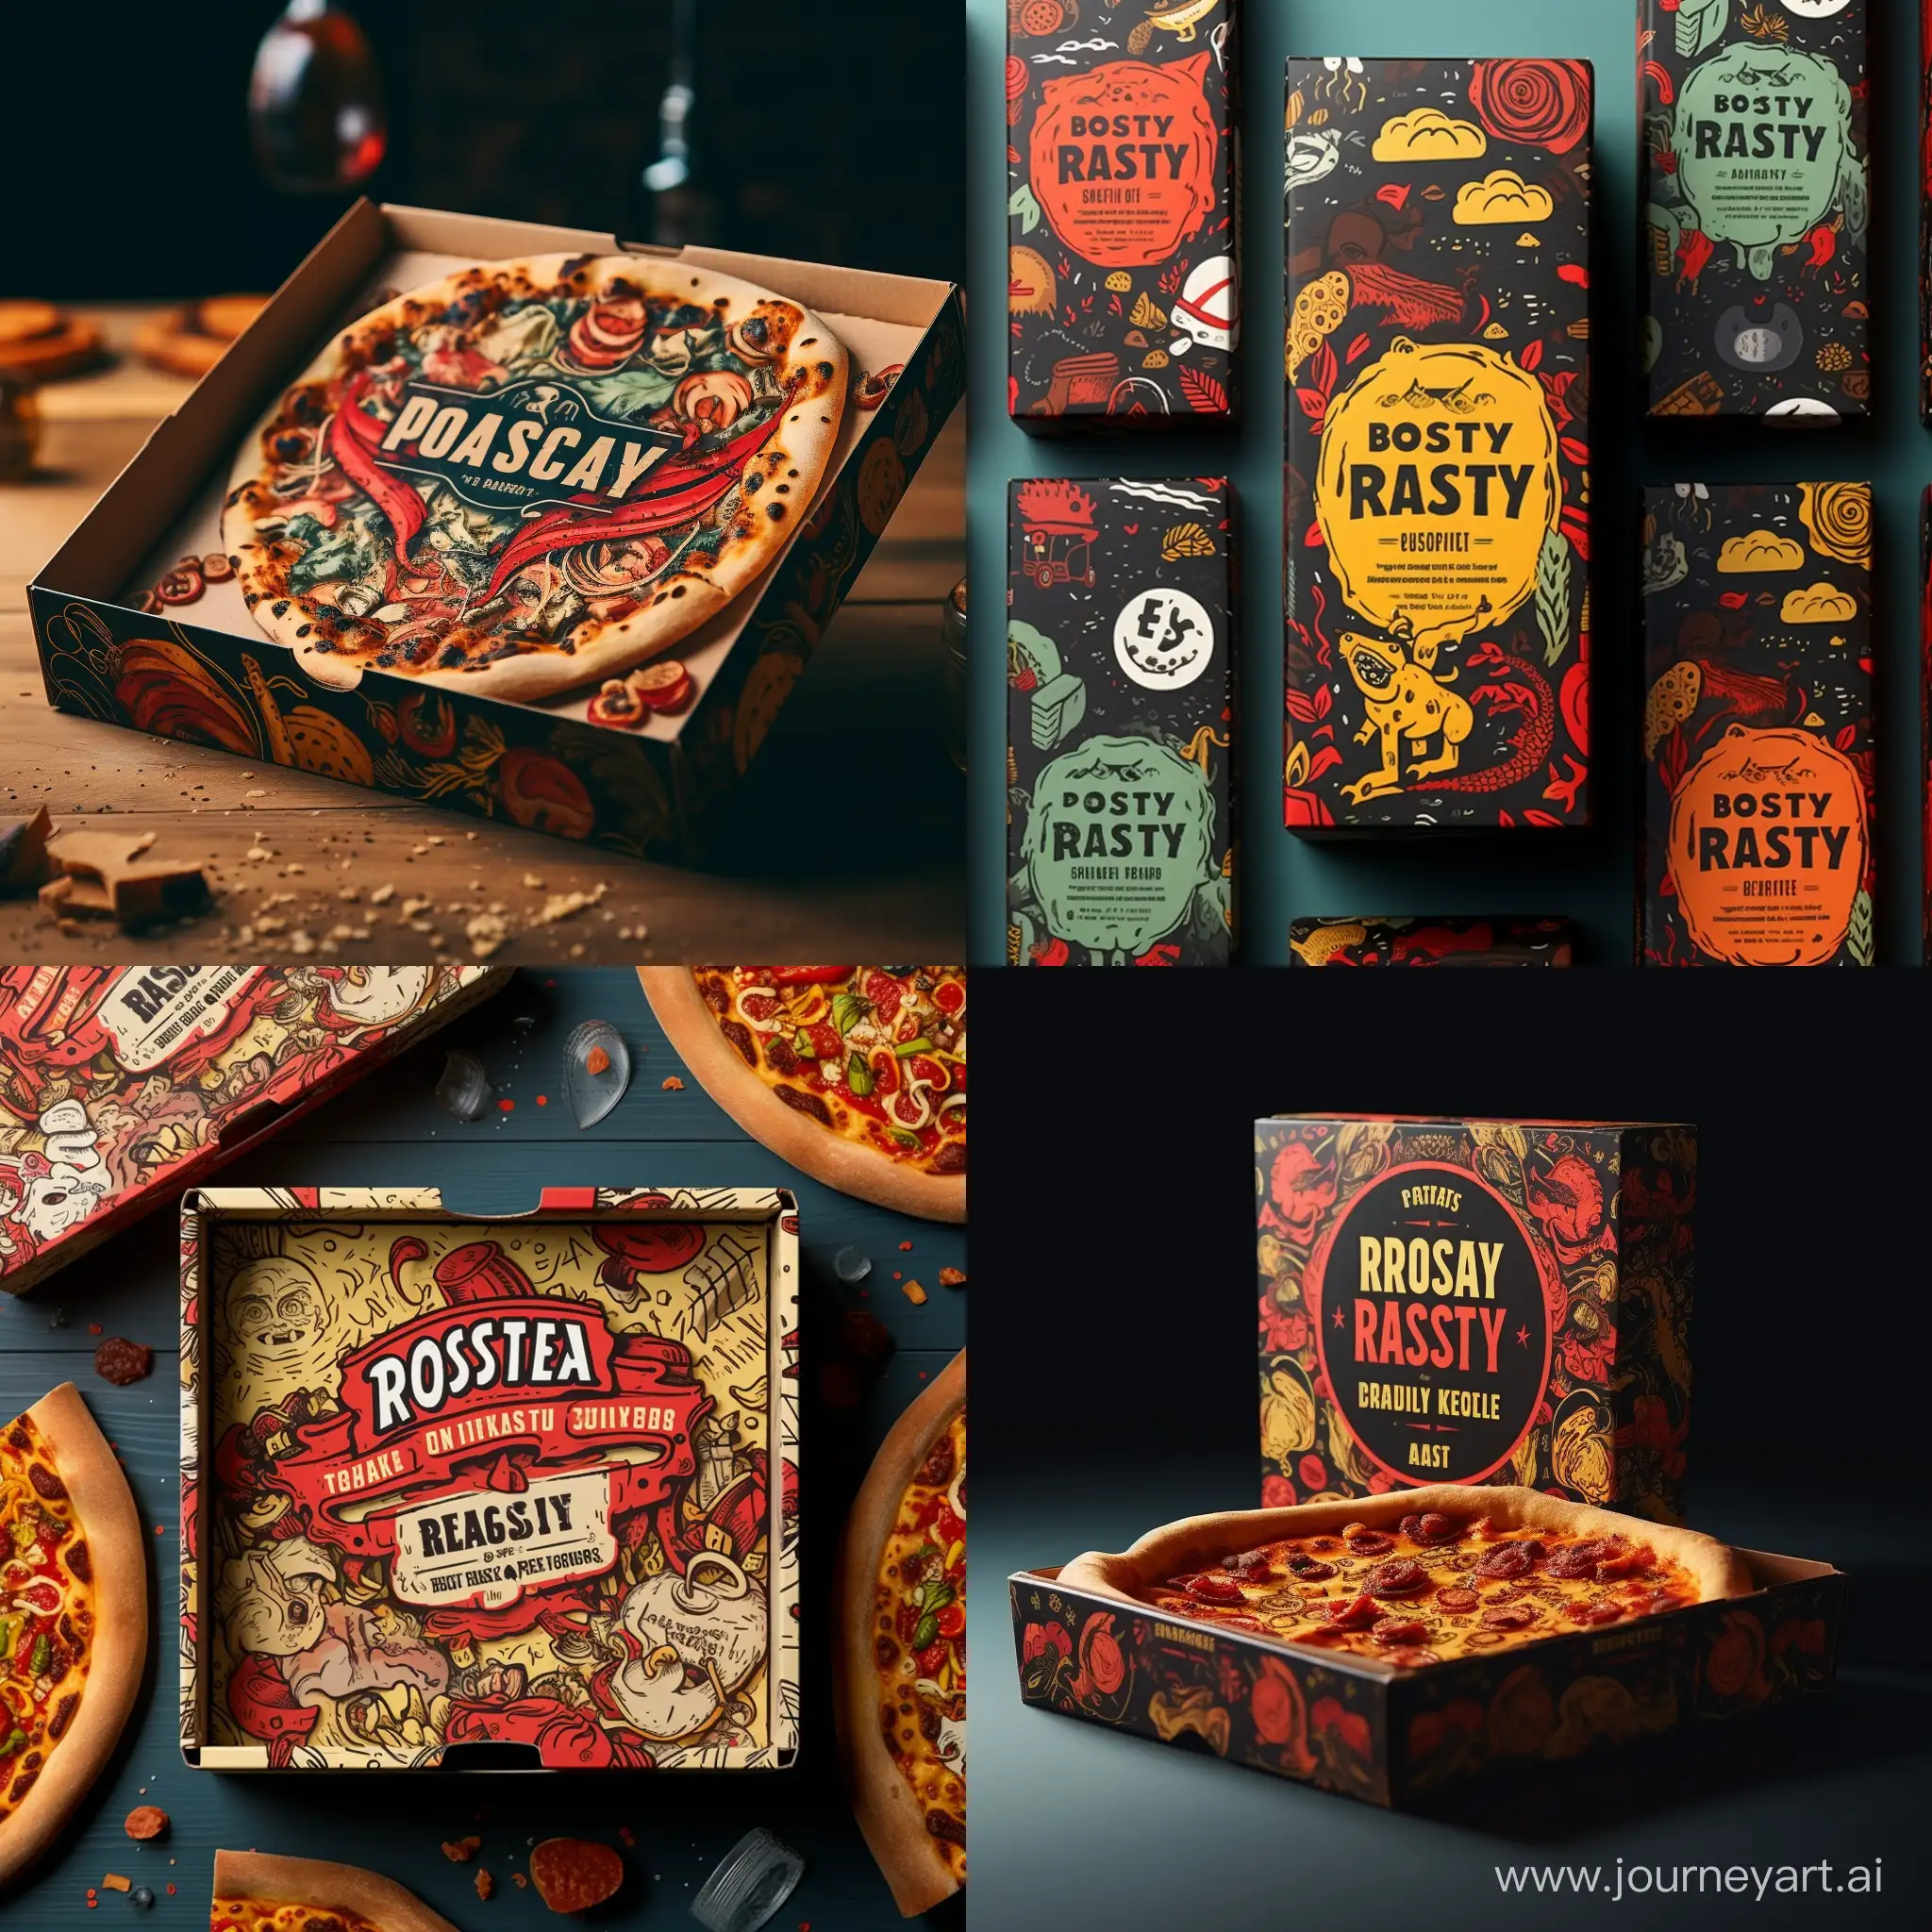 Artistic-Roasty-Pizza-Packaging-Design-with-11-Aspect-Ratio-Roastys-80566